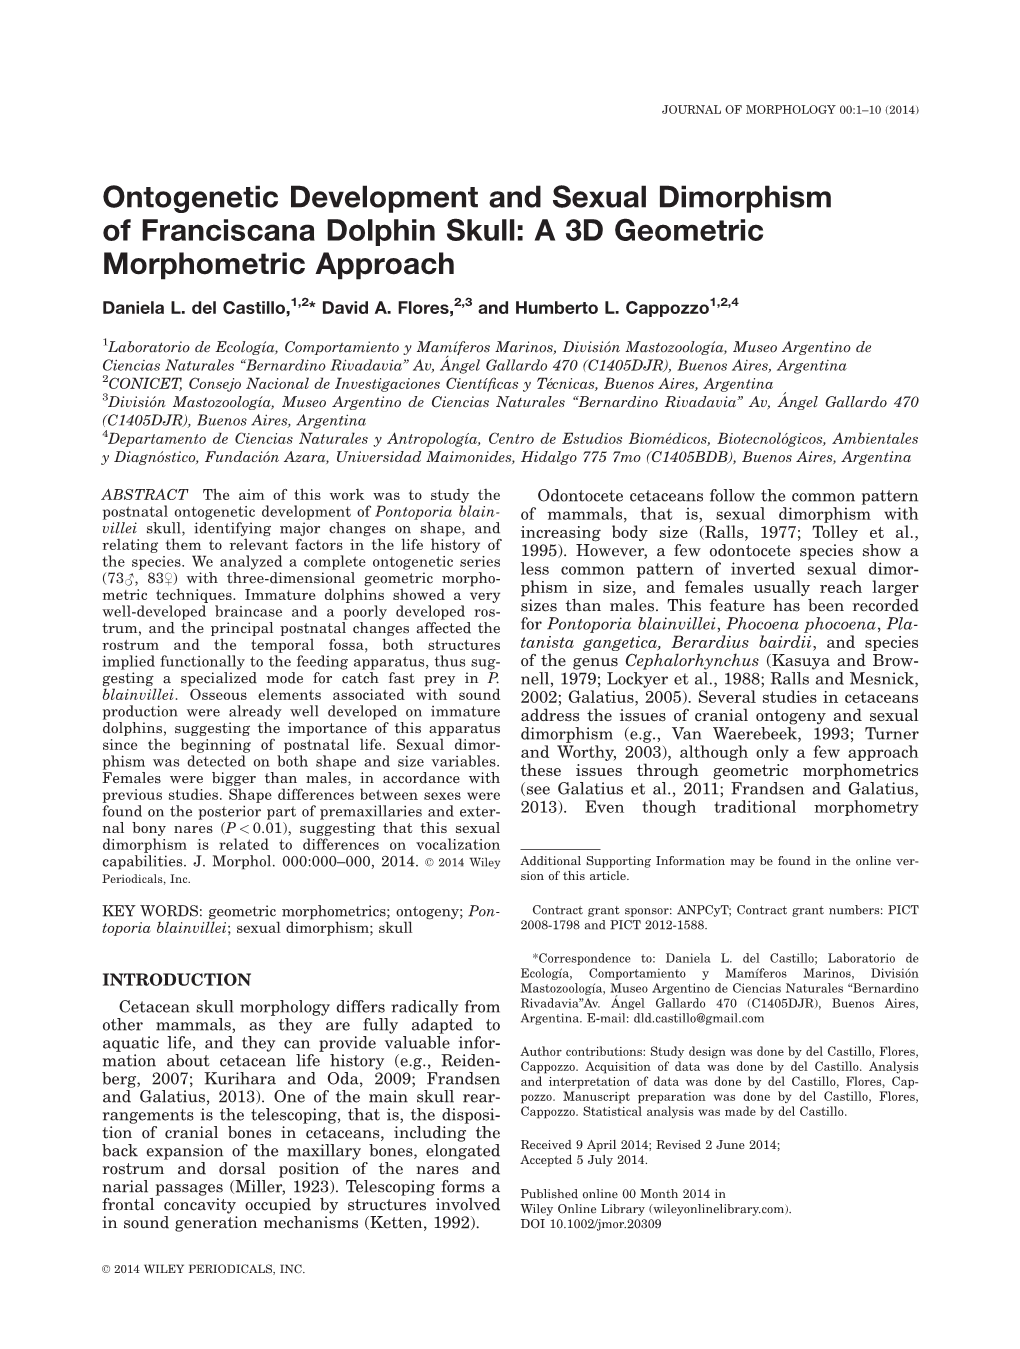 Ontogenetic Development and Sexual Dimorphism of Franciscana Dolphin Skull: a 3D Geometric Morphometric Approach